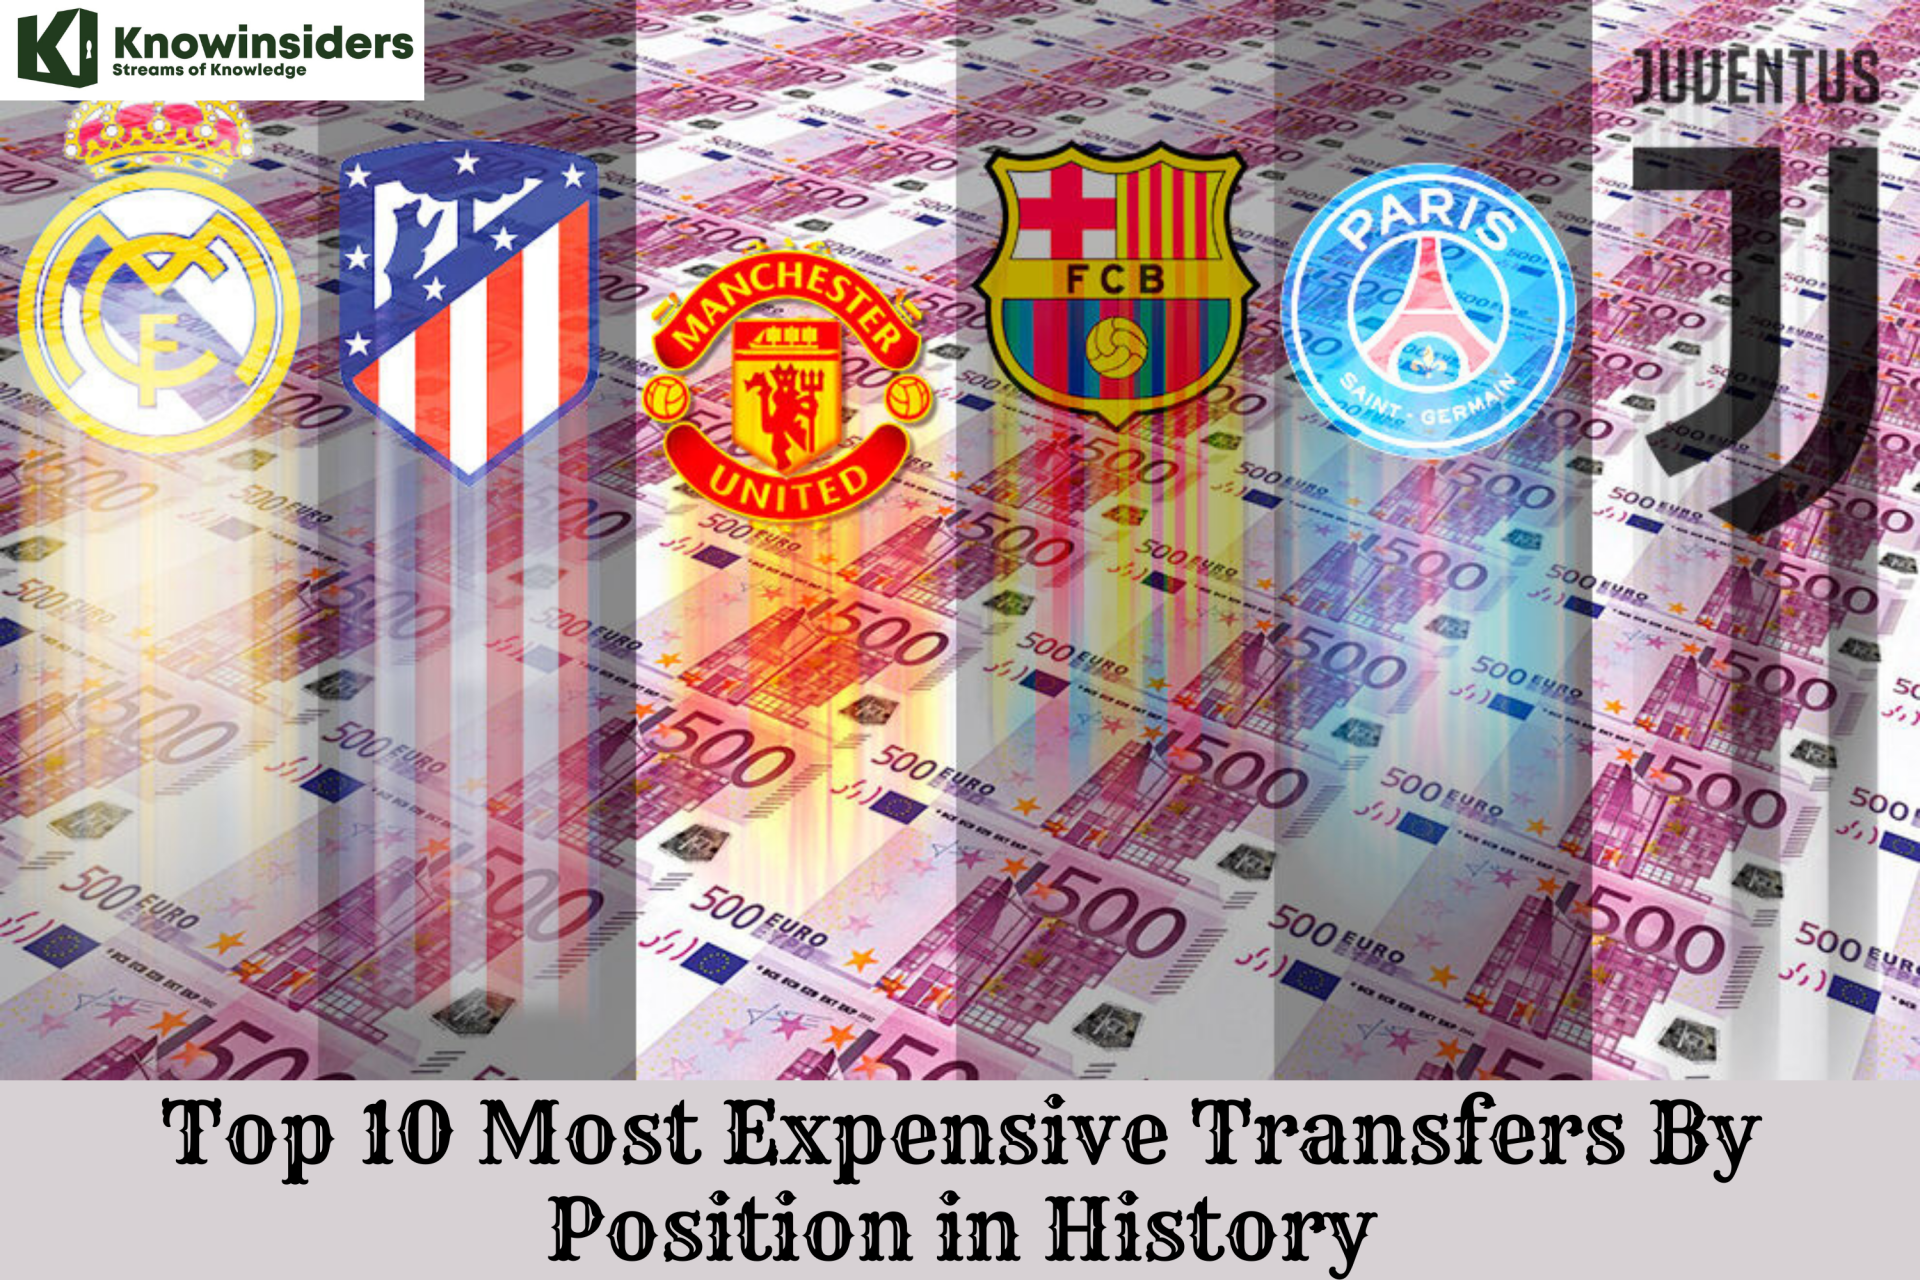 Top 10 Most Expensive Transfers By Position in History